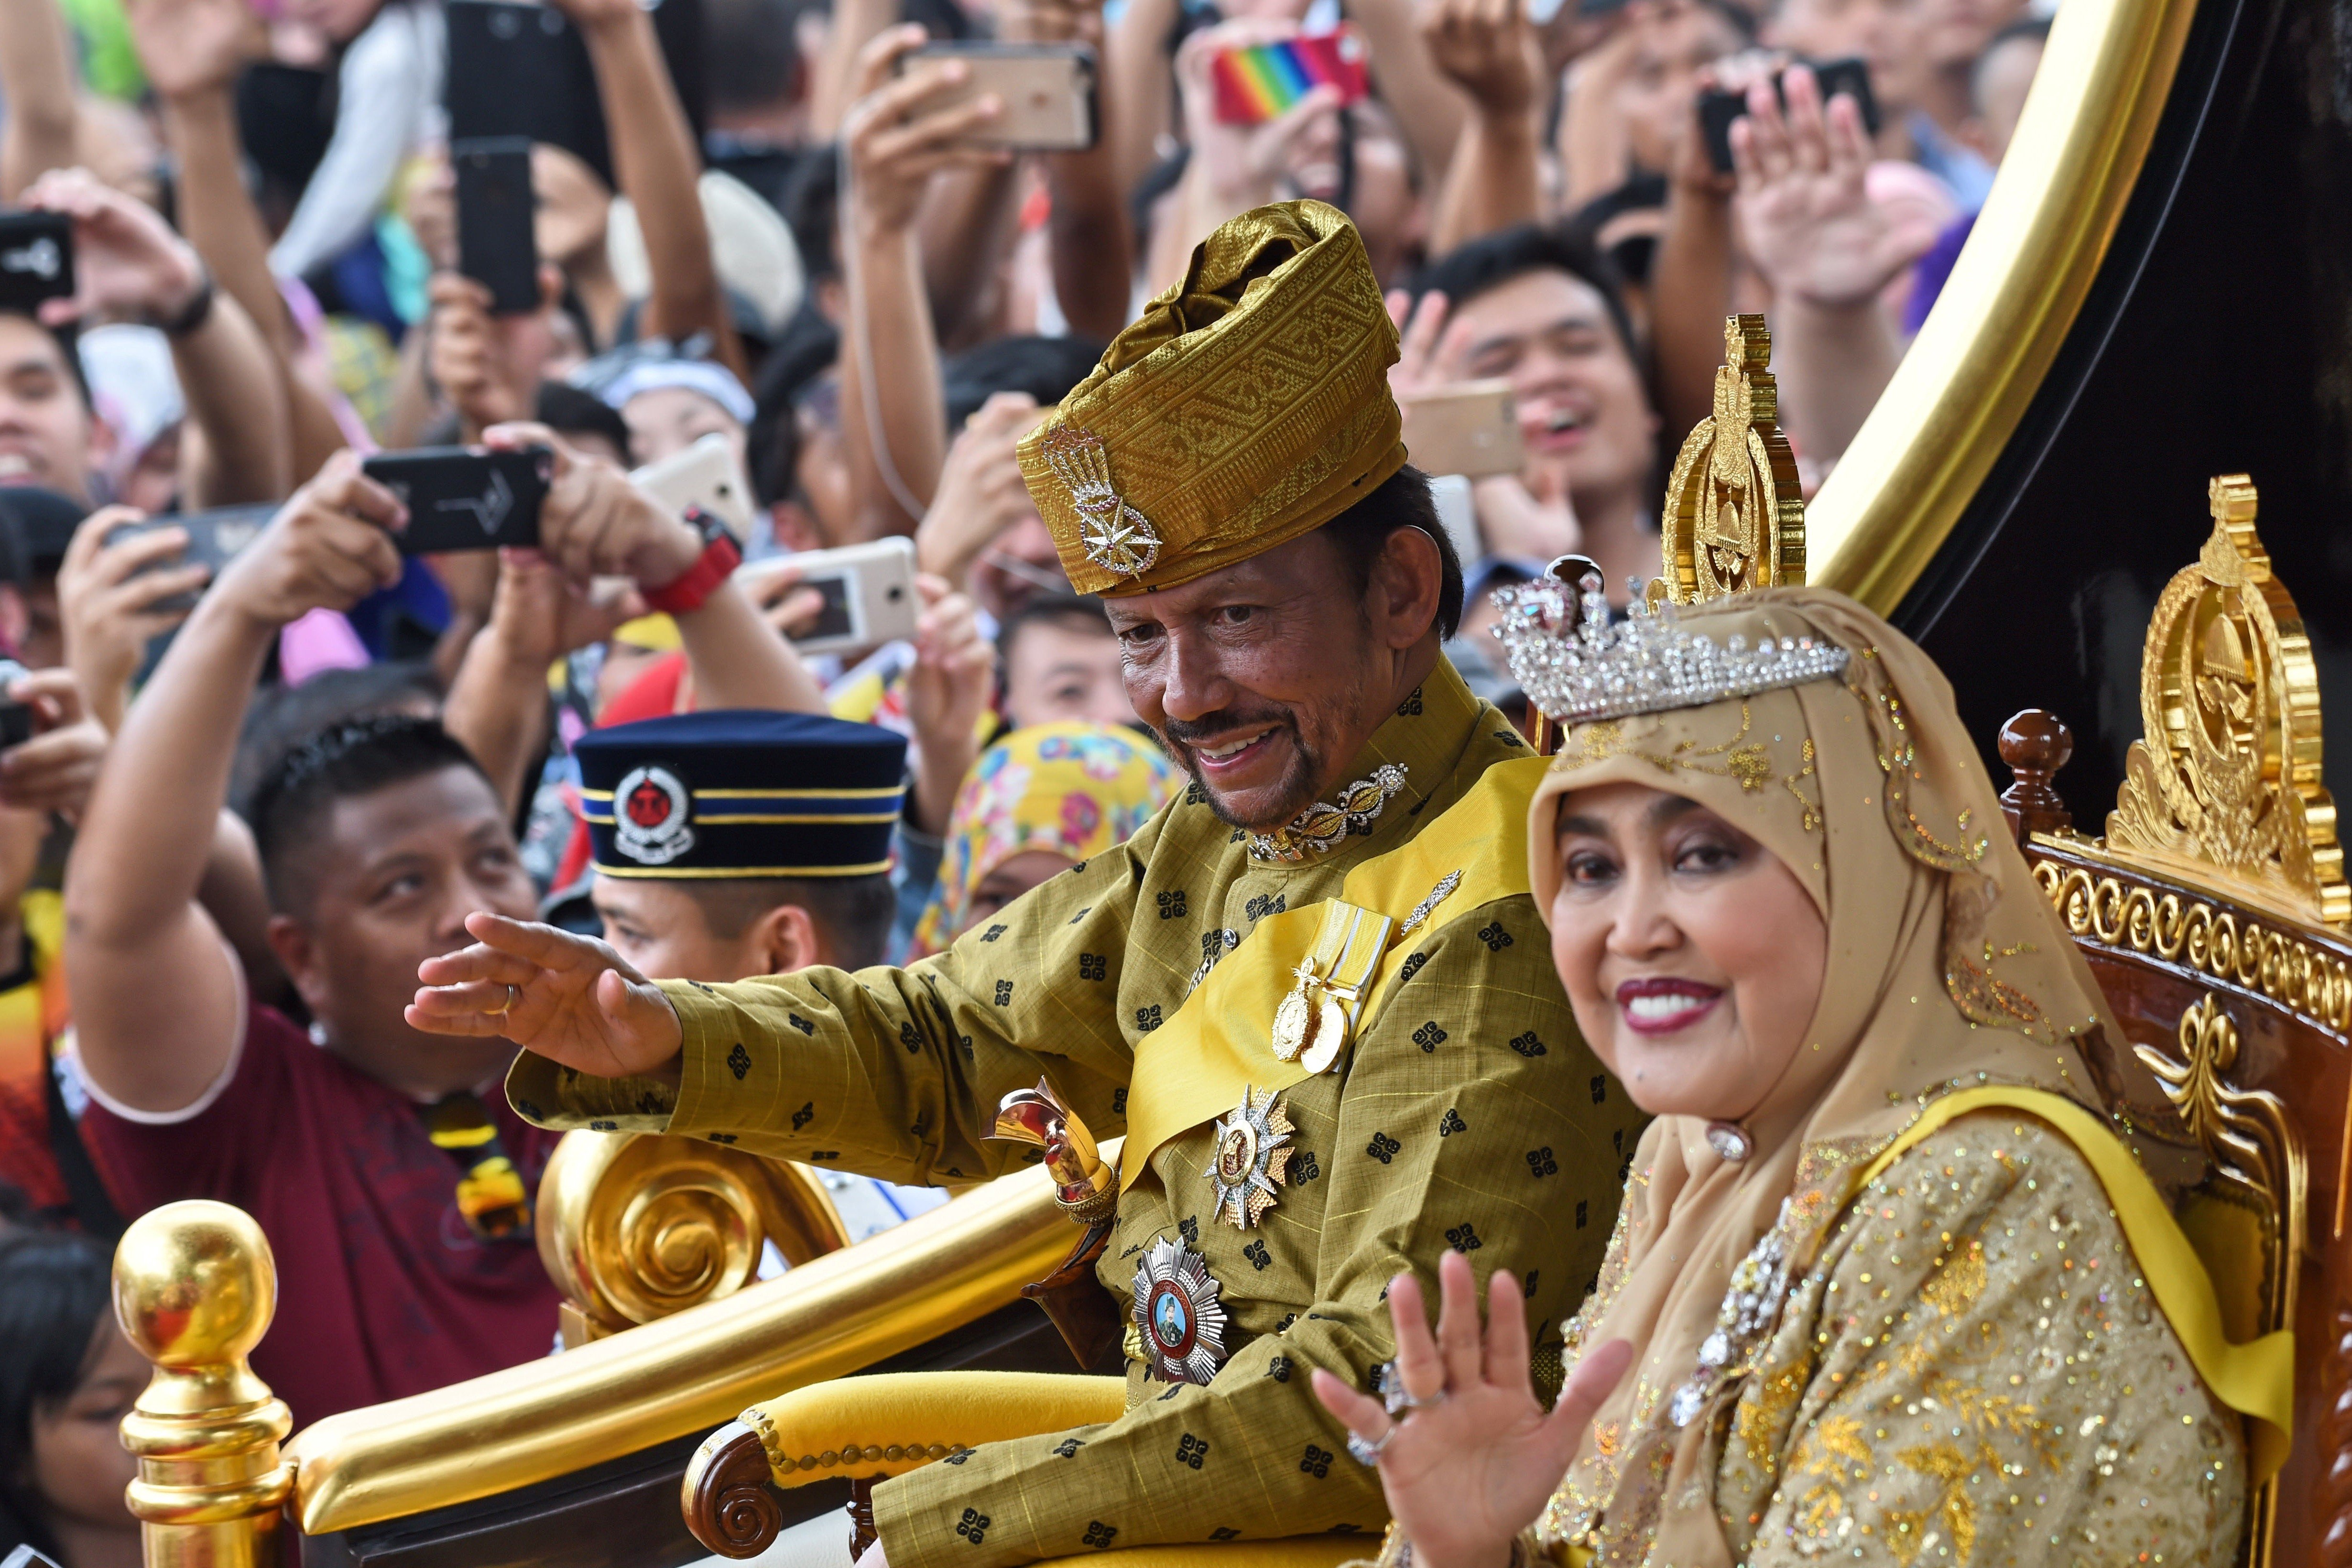 With photo opportunities like the Sultan of Brunei’s lavish birthday banquet, is it any wonder some of Southeast Asia’s royals have as many Instagram followers as subjects?